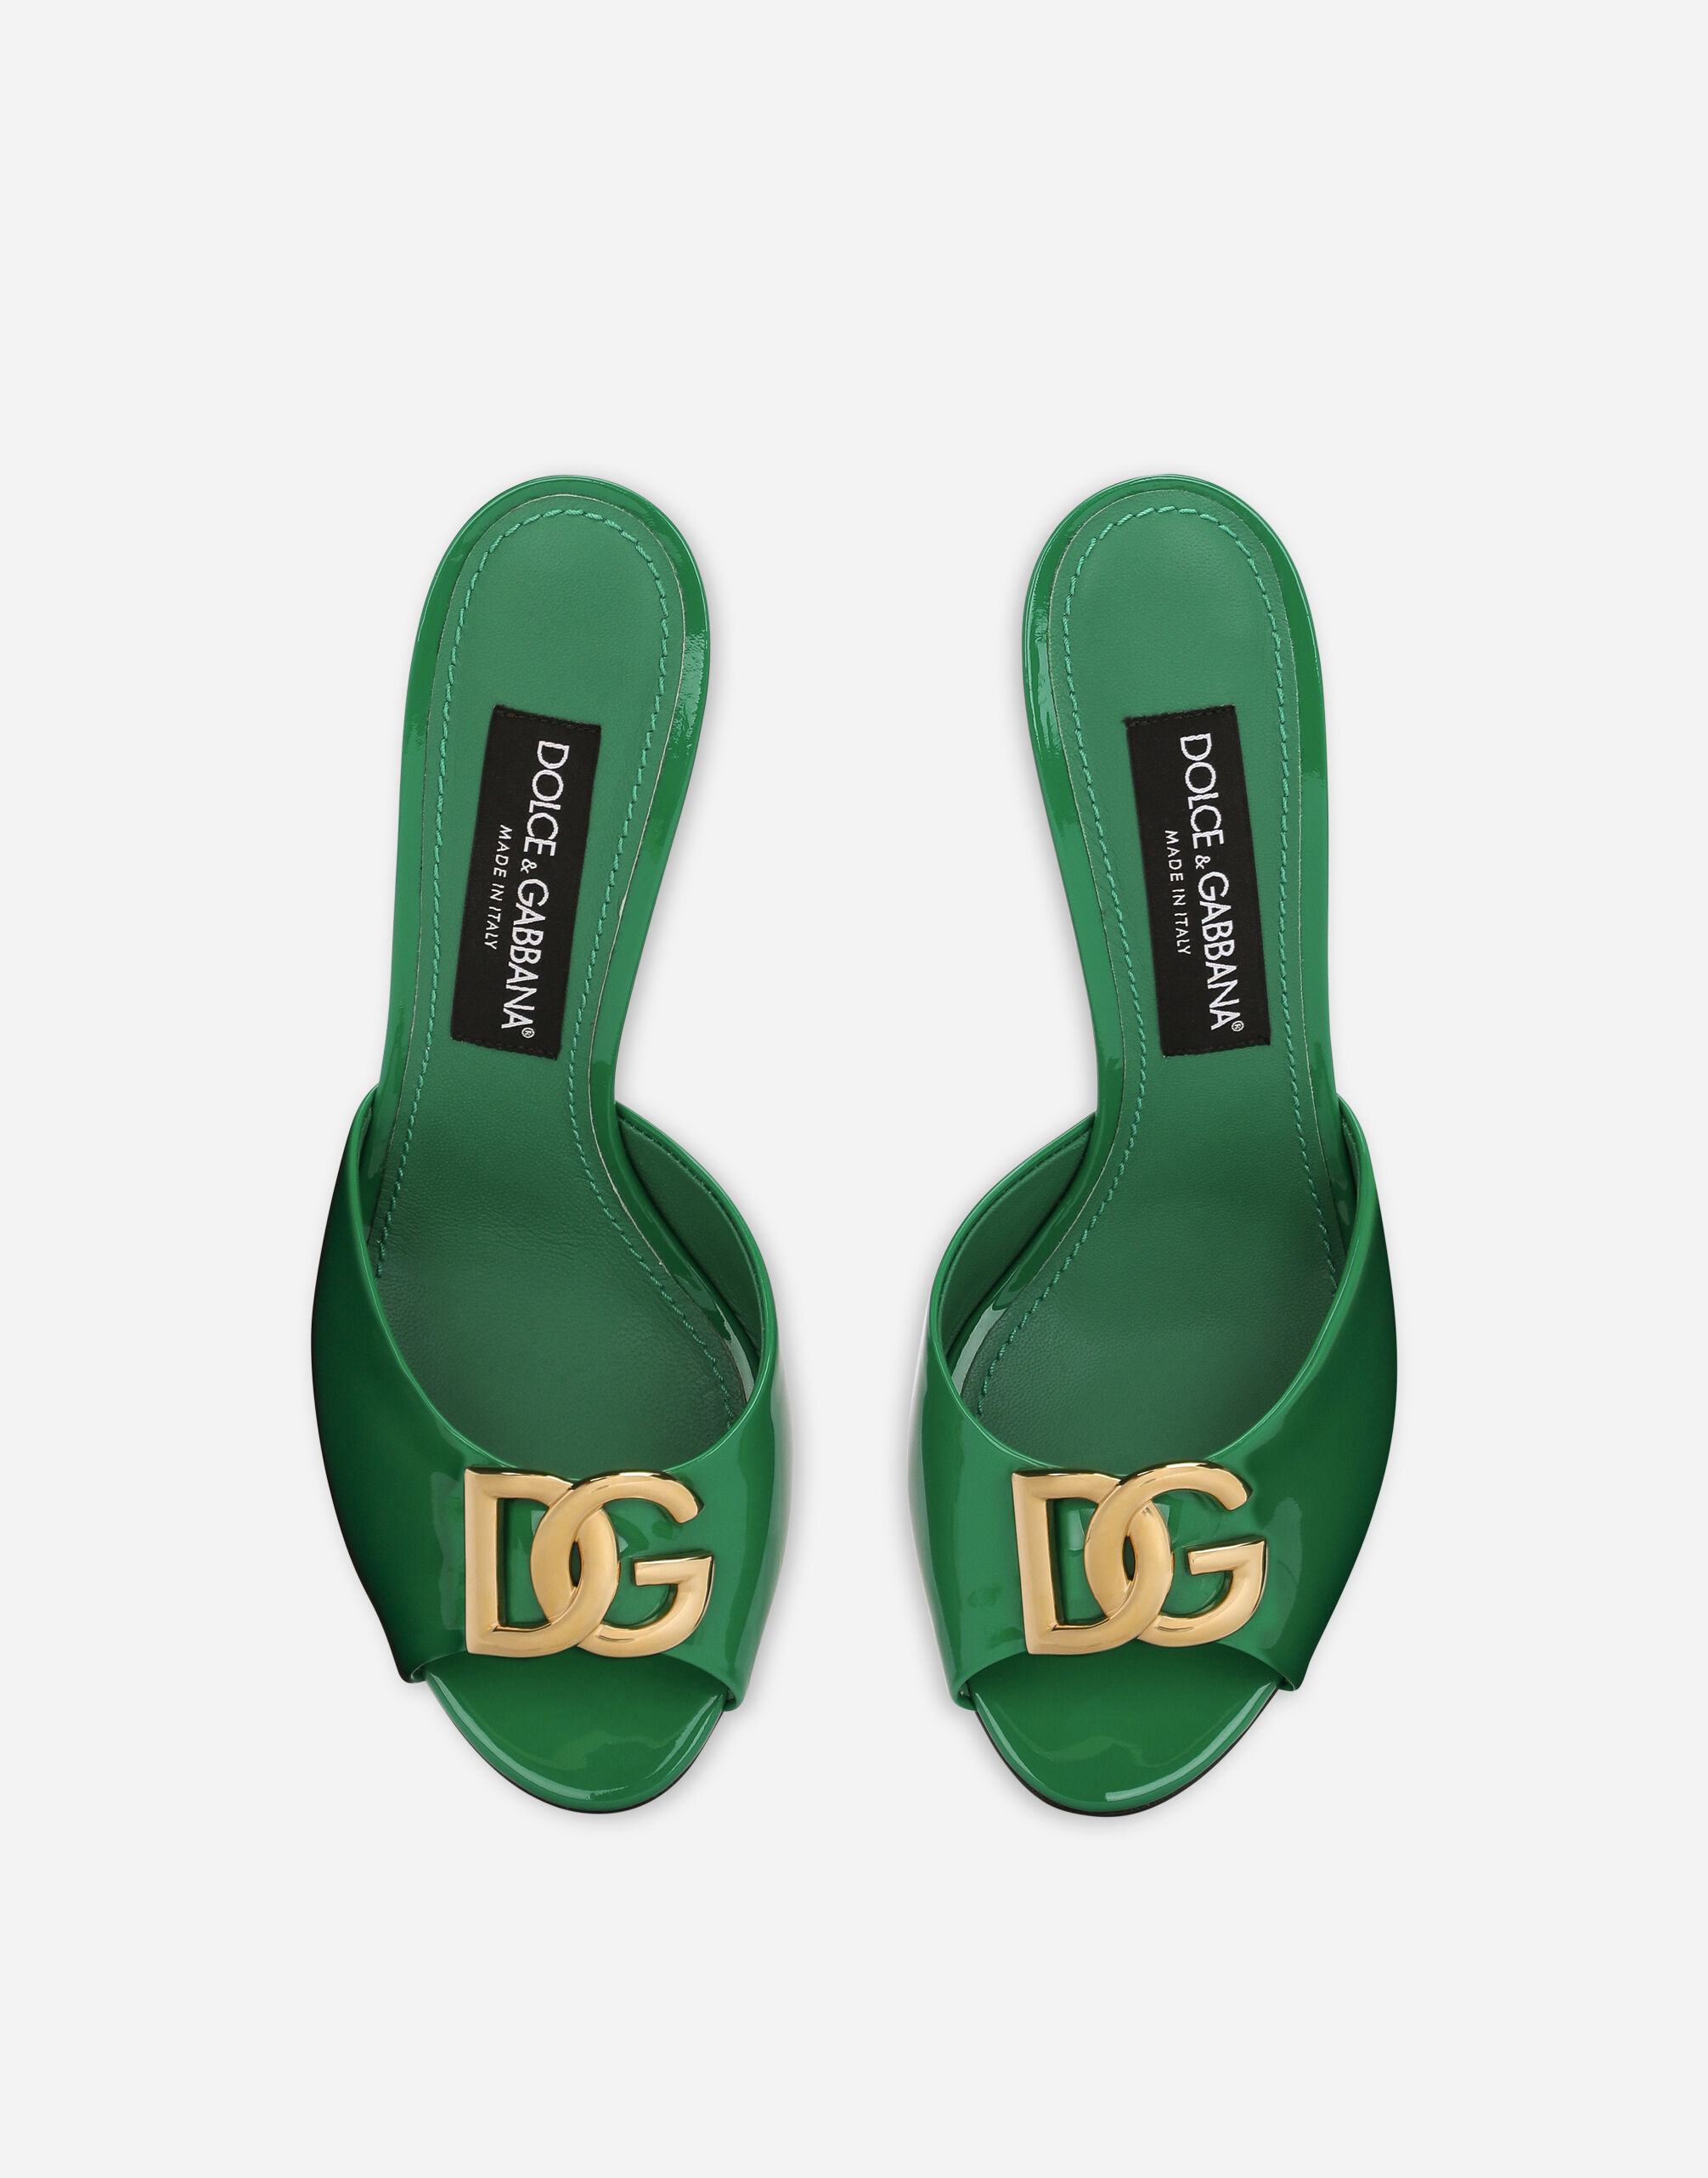 Patent leather mules with DG logo